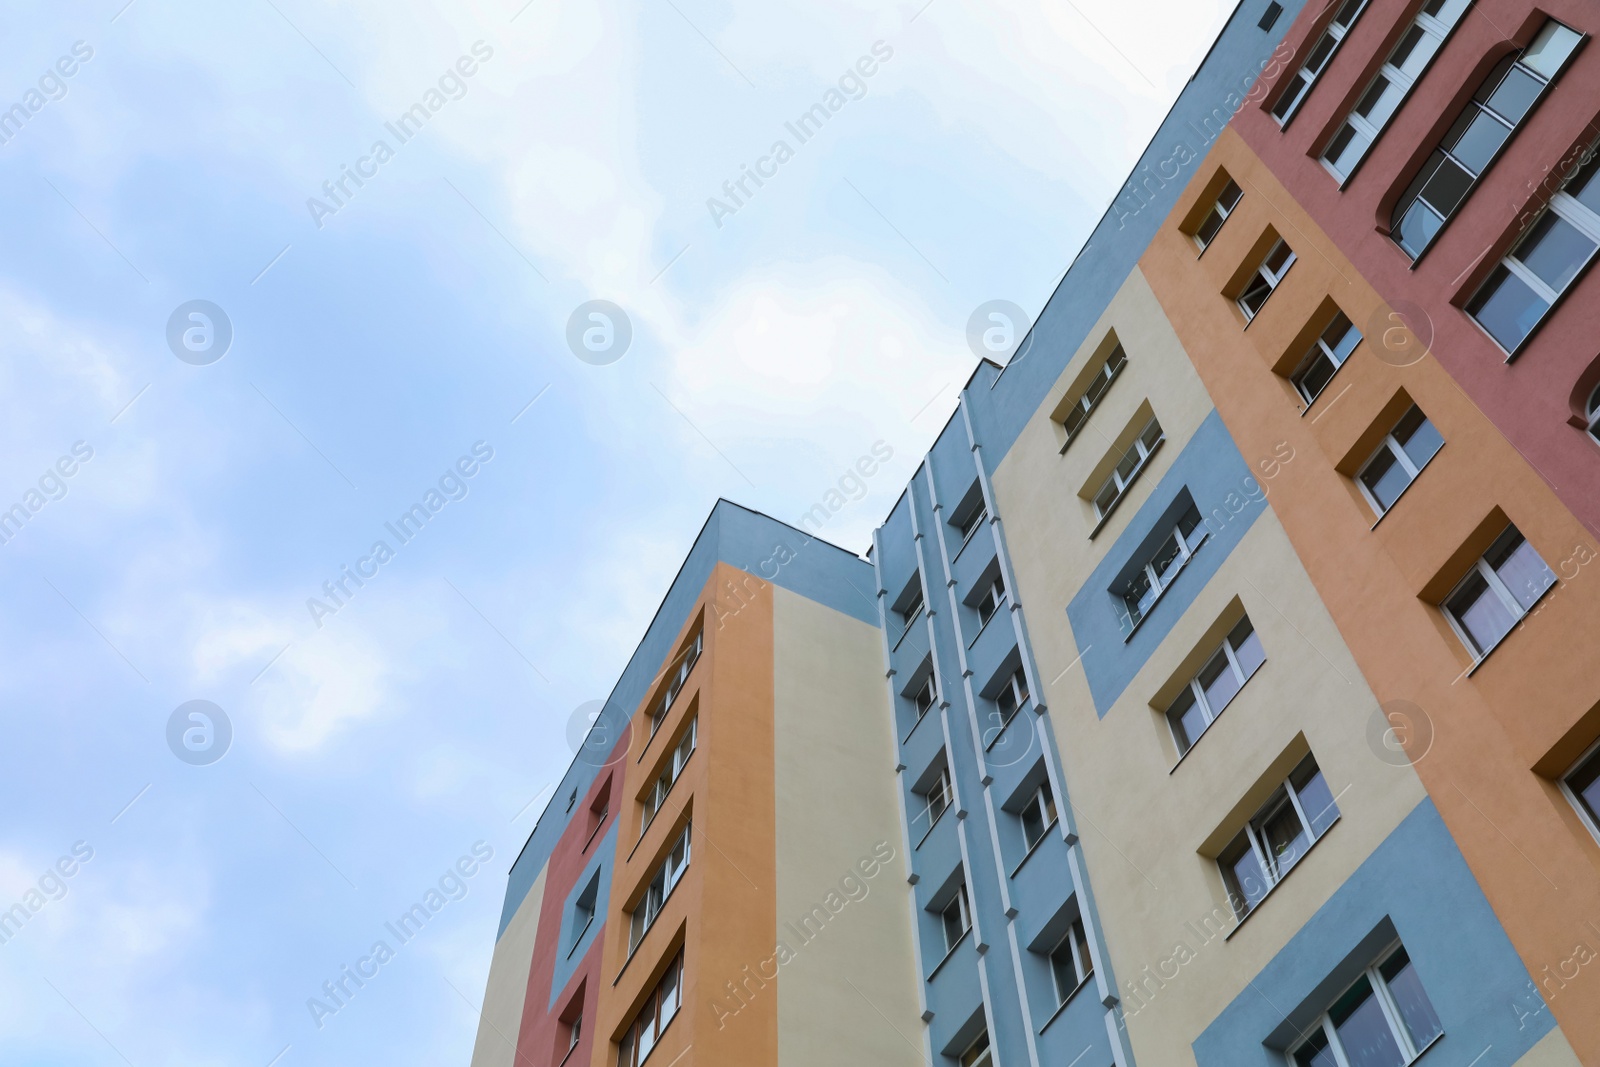 Photo of Multistorey apartment building against cloudy sky, low angle view